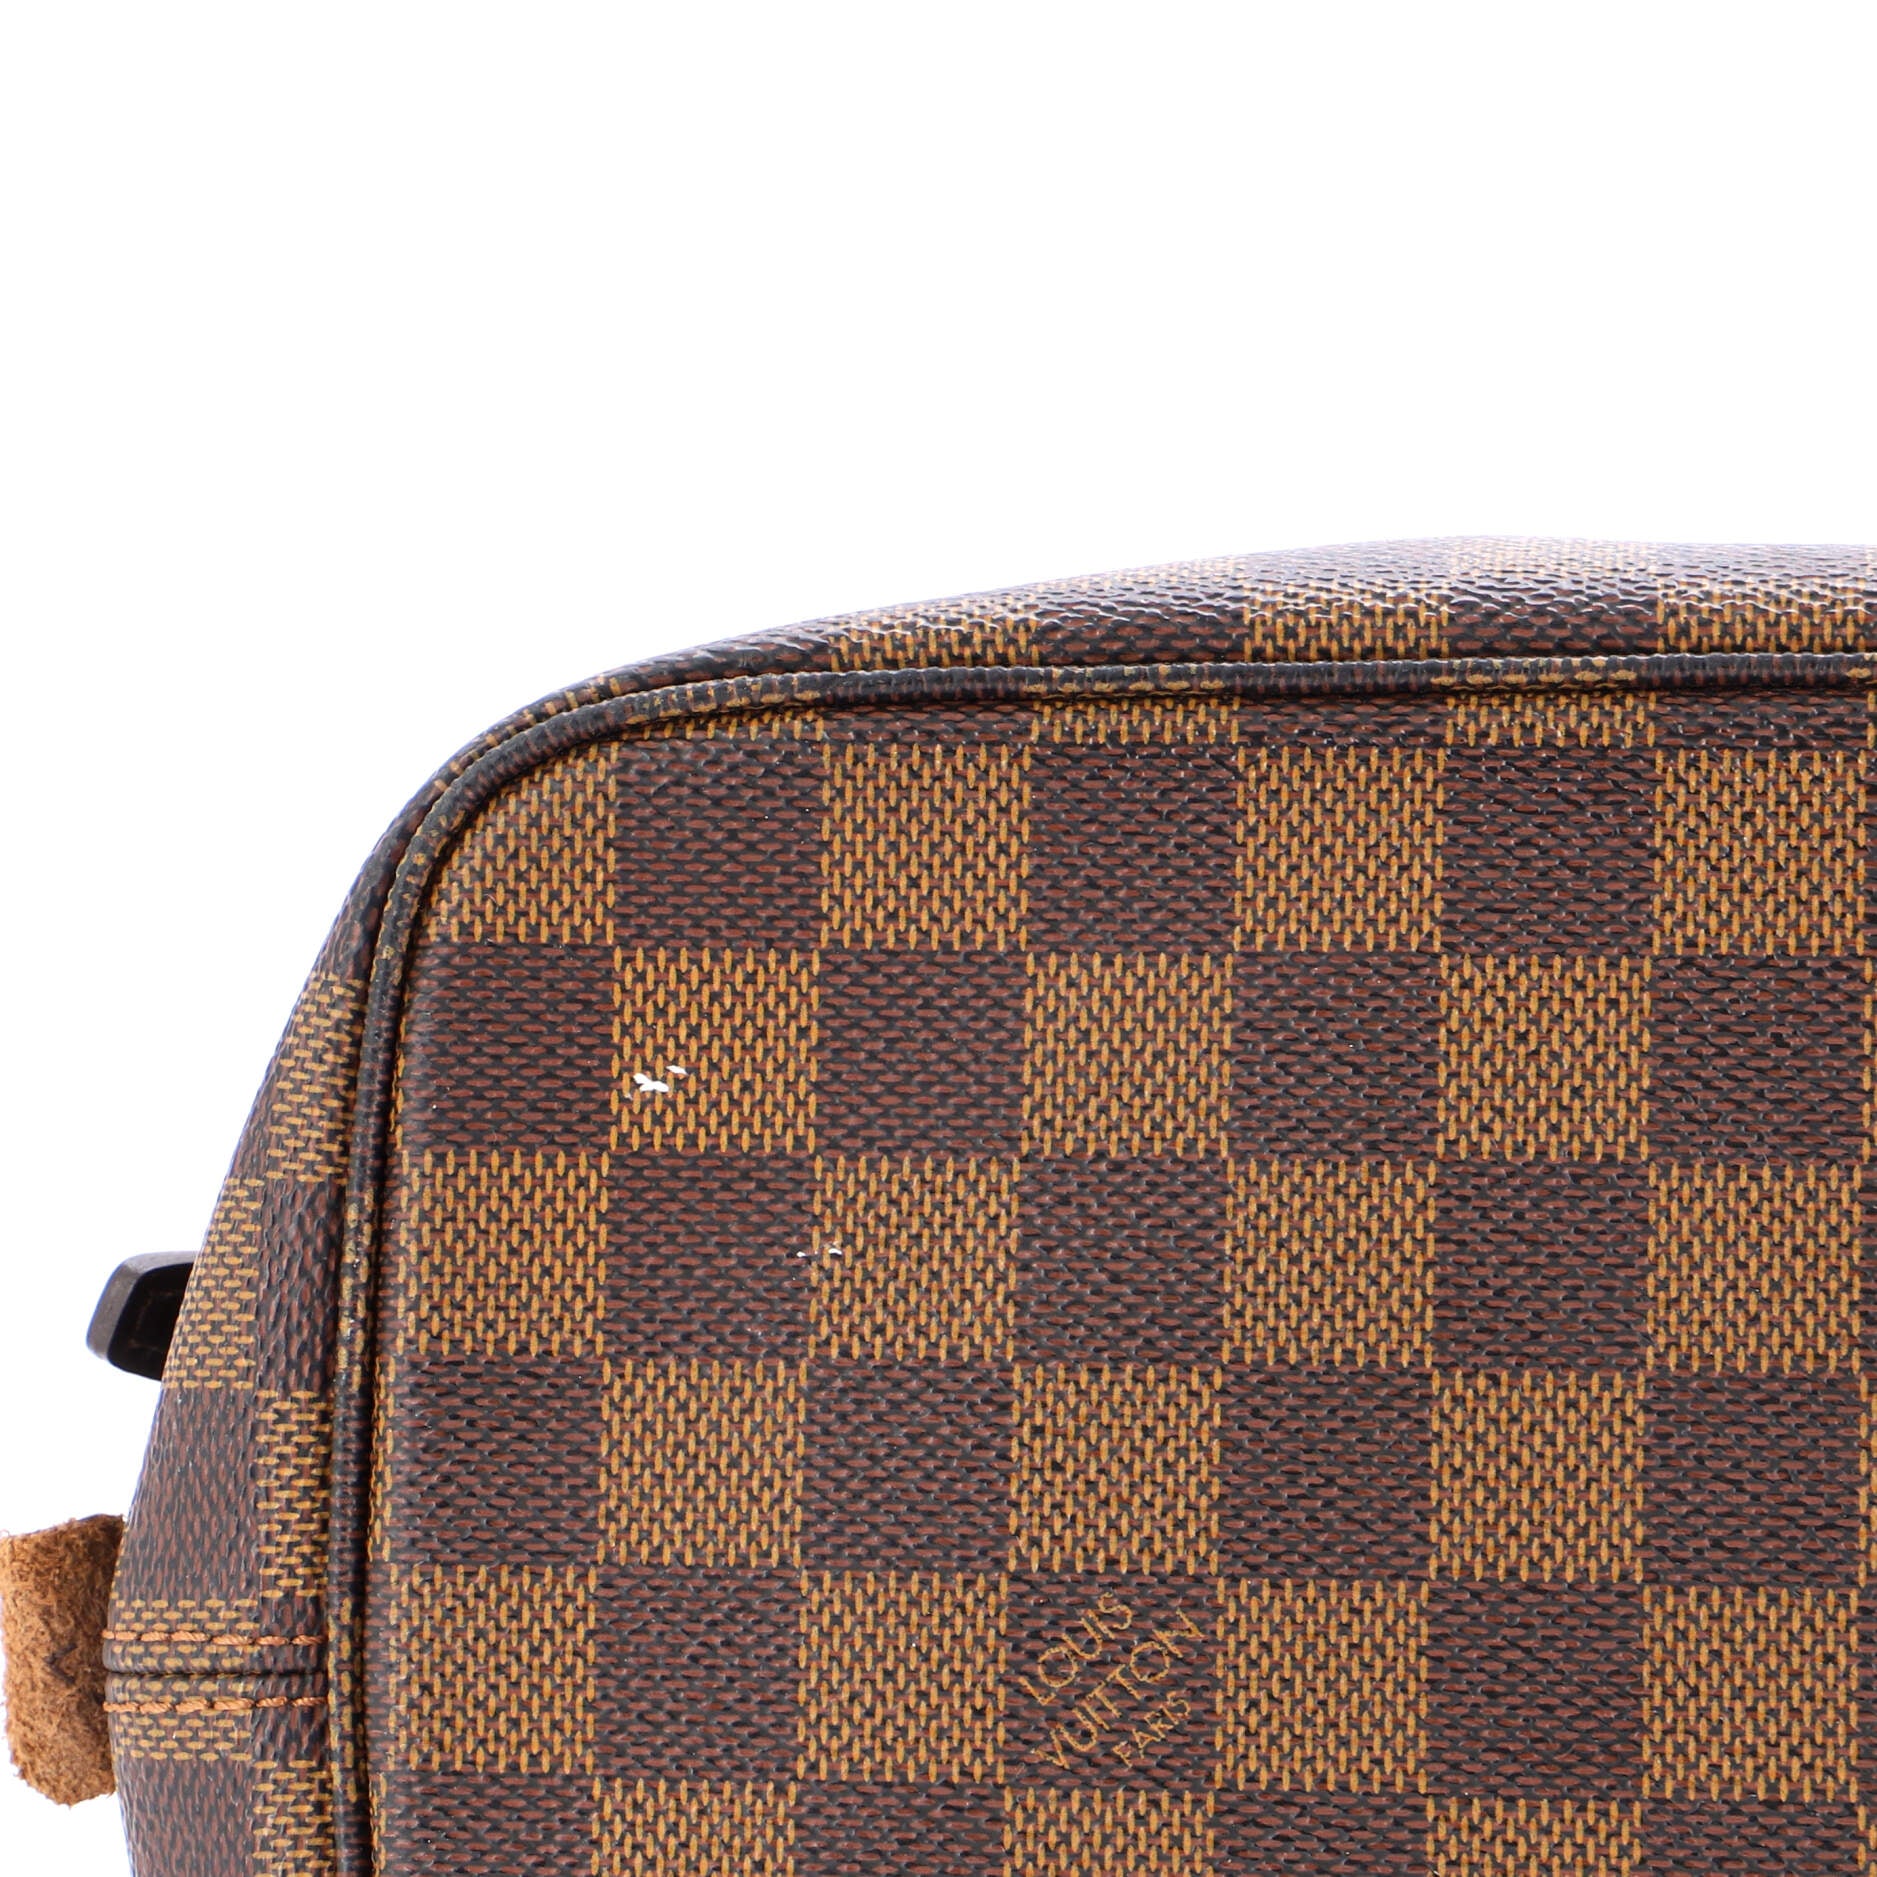 Louis Vuitton 2002 pre-owned LV Cup Weatherly Crossbody Bag - Farfetch